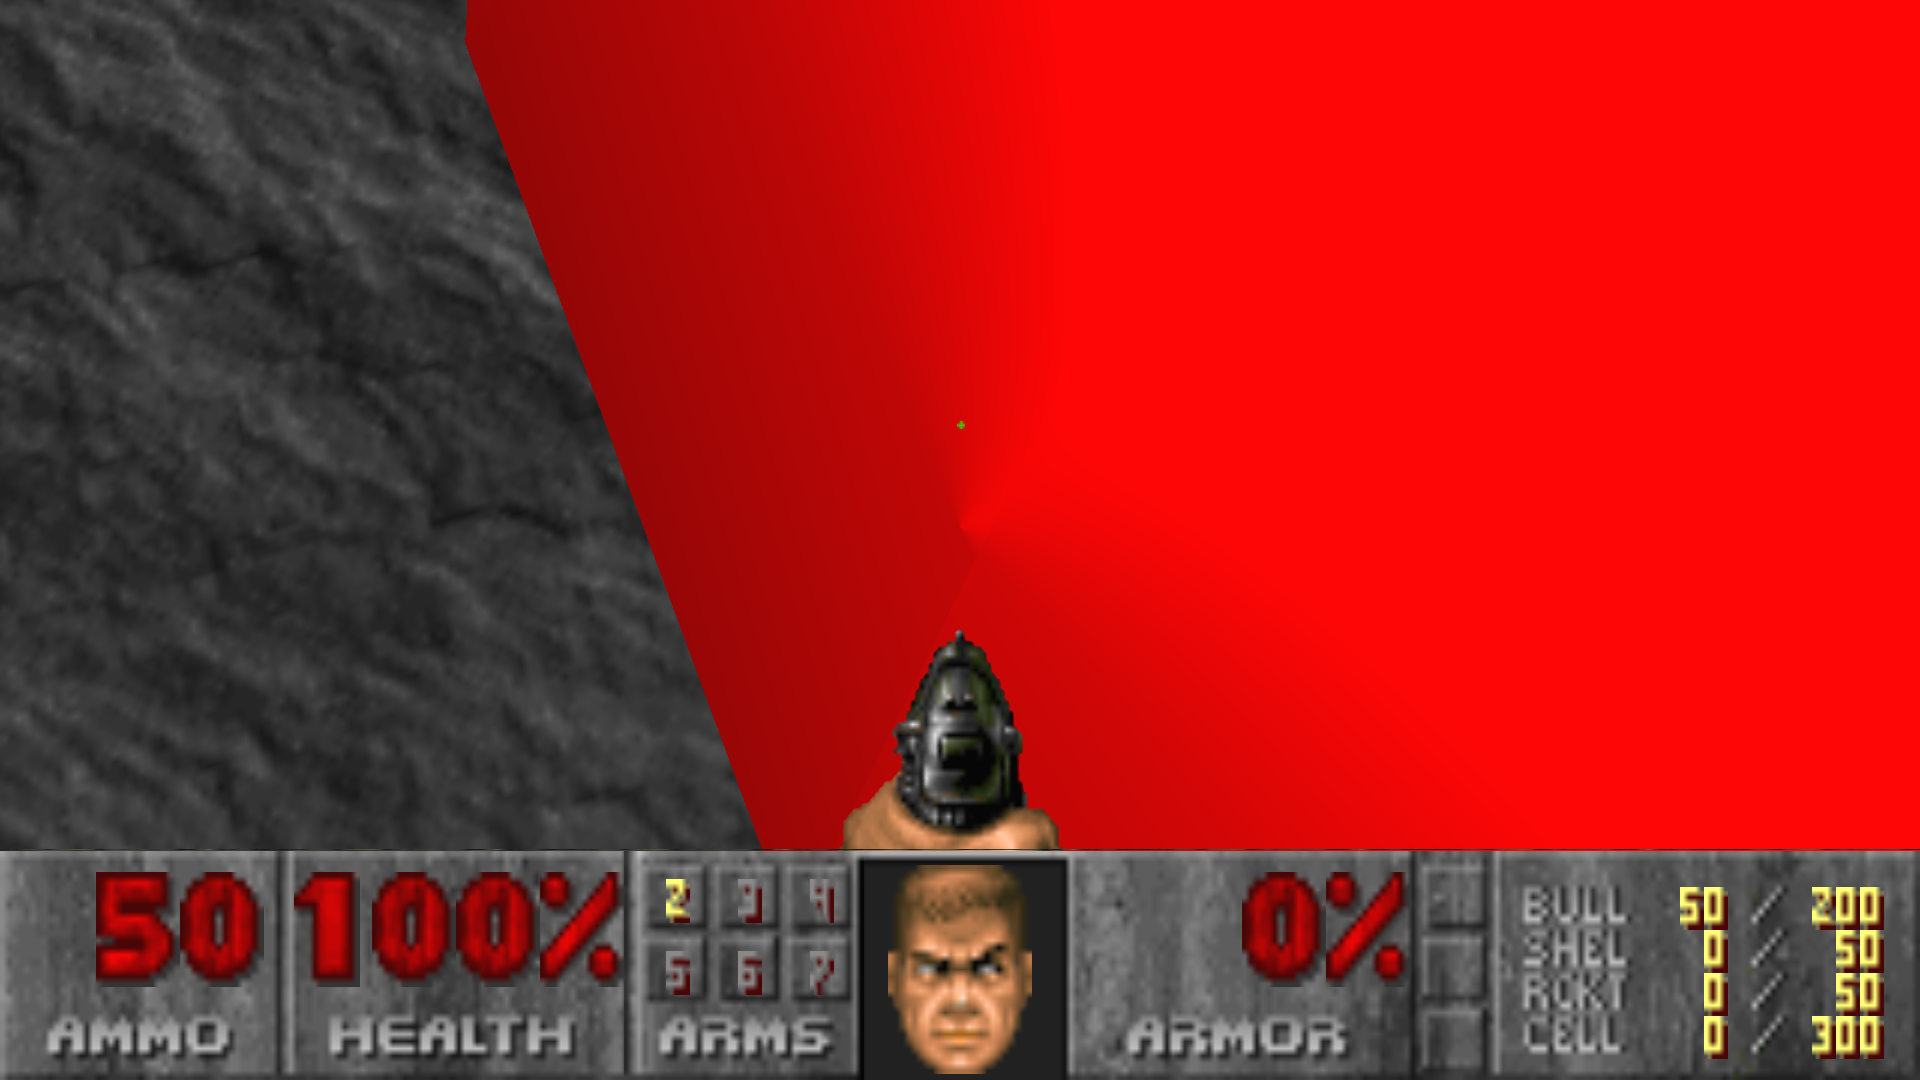 1555263380_Entryway-DOOM2_HellonEarth11_19_202212_22_52AM.png.147366e606bdc3e9165c3eeed1beb2b4.png